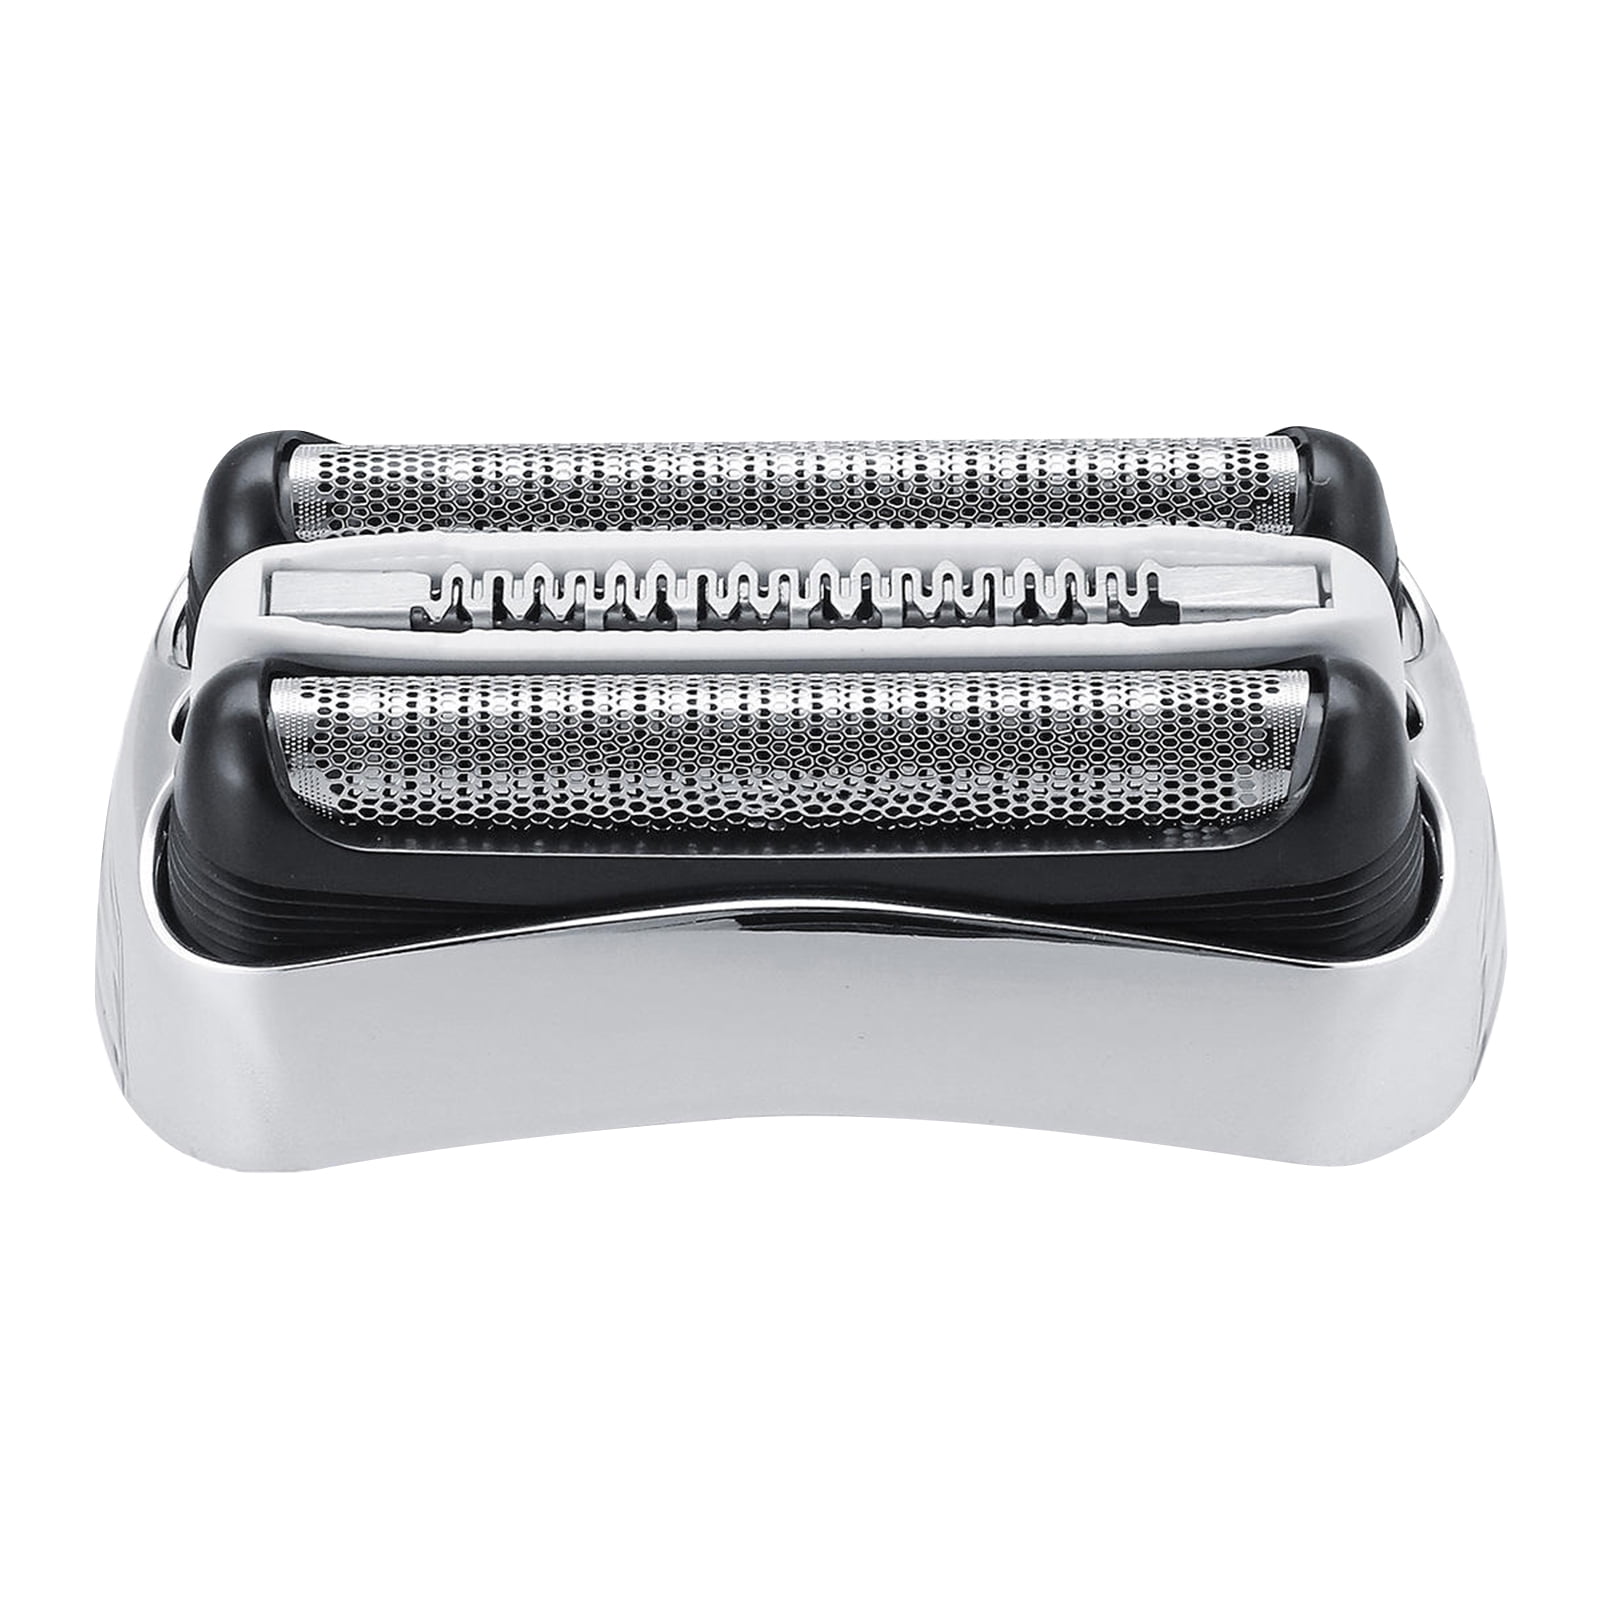 32S Electric Shavers Replacement Part Shaving Foil Cassette Heads  Replacement for Braun Series 3 - Walmart.com